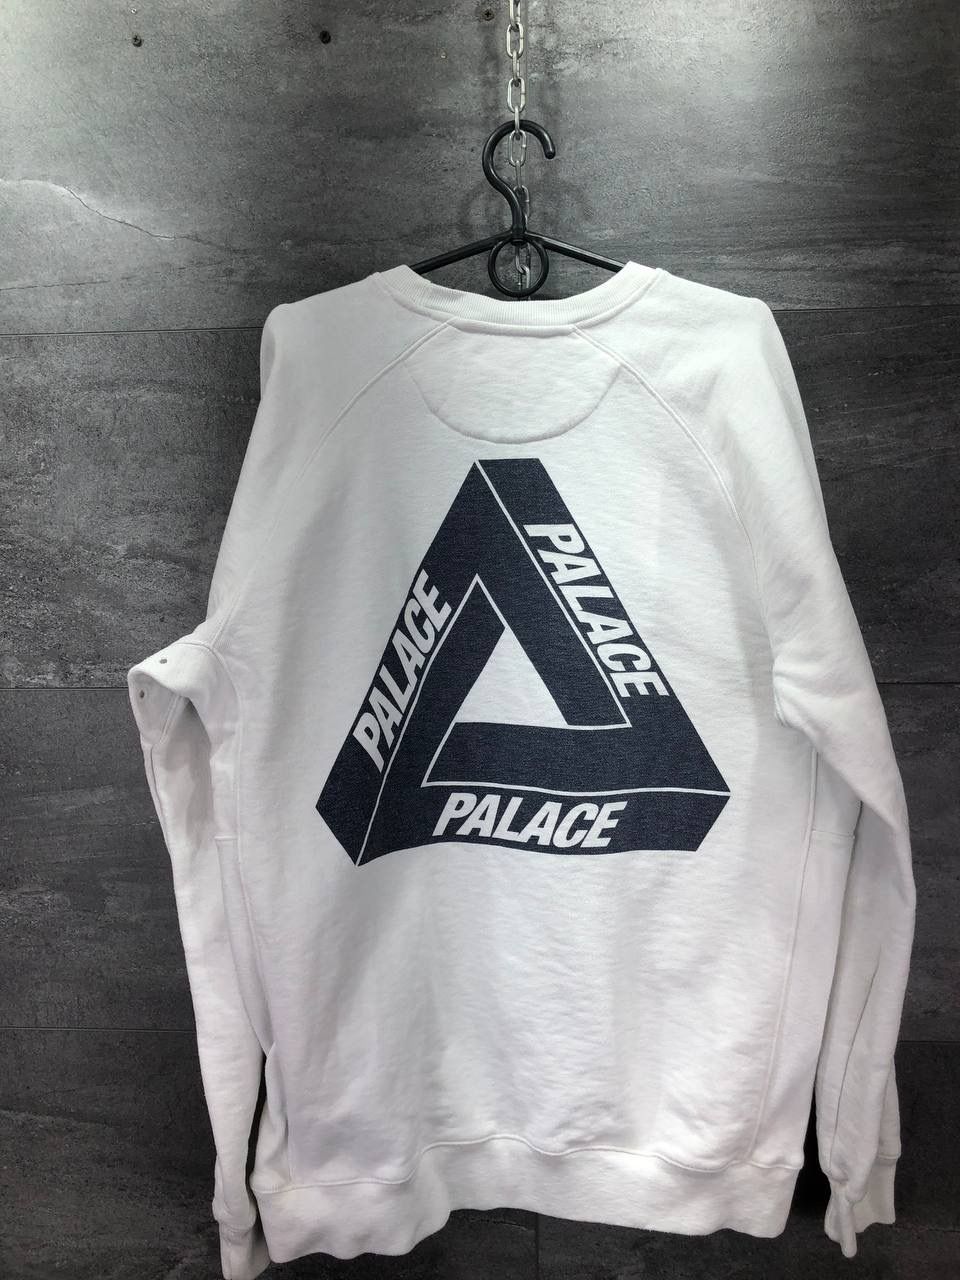 Pre-owned Palace Tri-line Jumper Sweatshirt Men's Size L In White